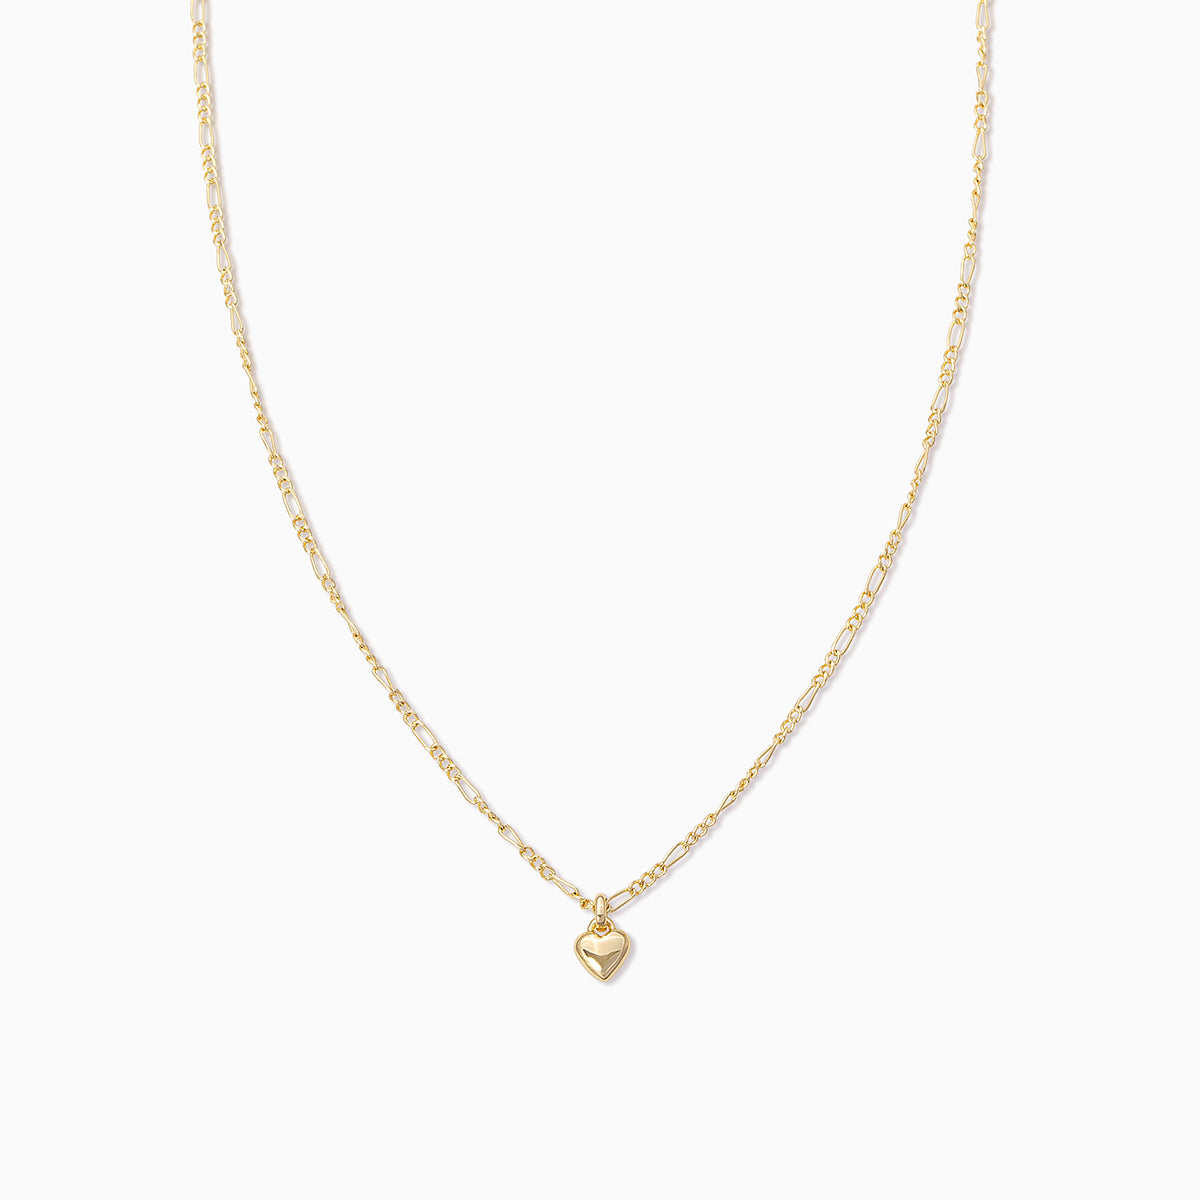 Mini Heart Necklace | Gold | Product Image | Uncommon James